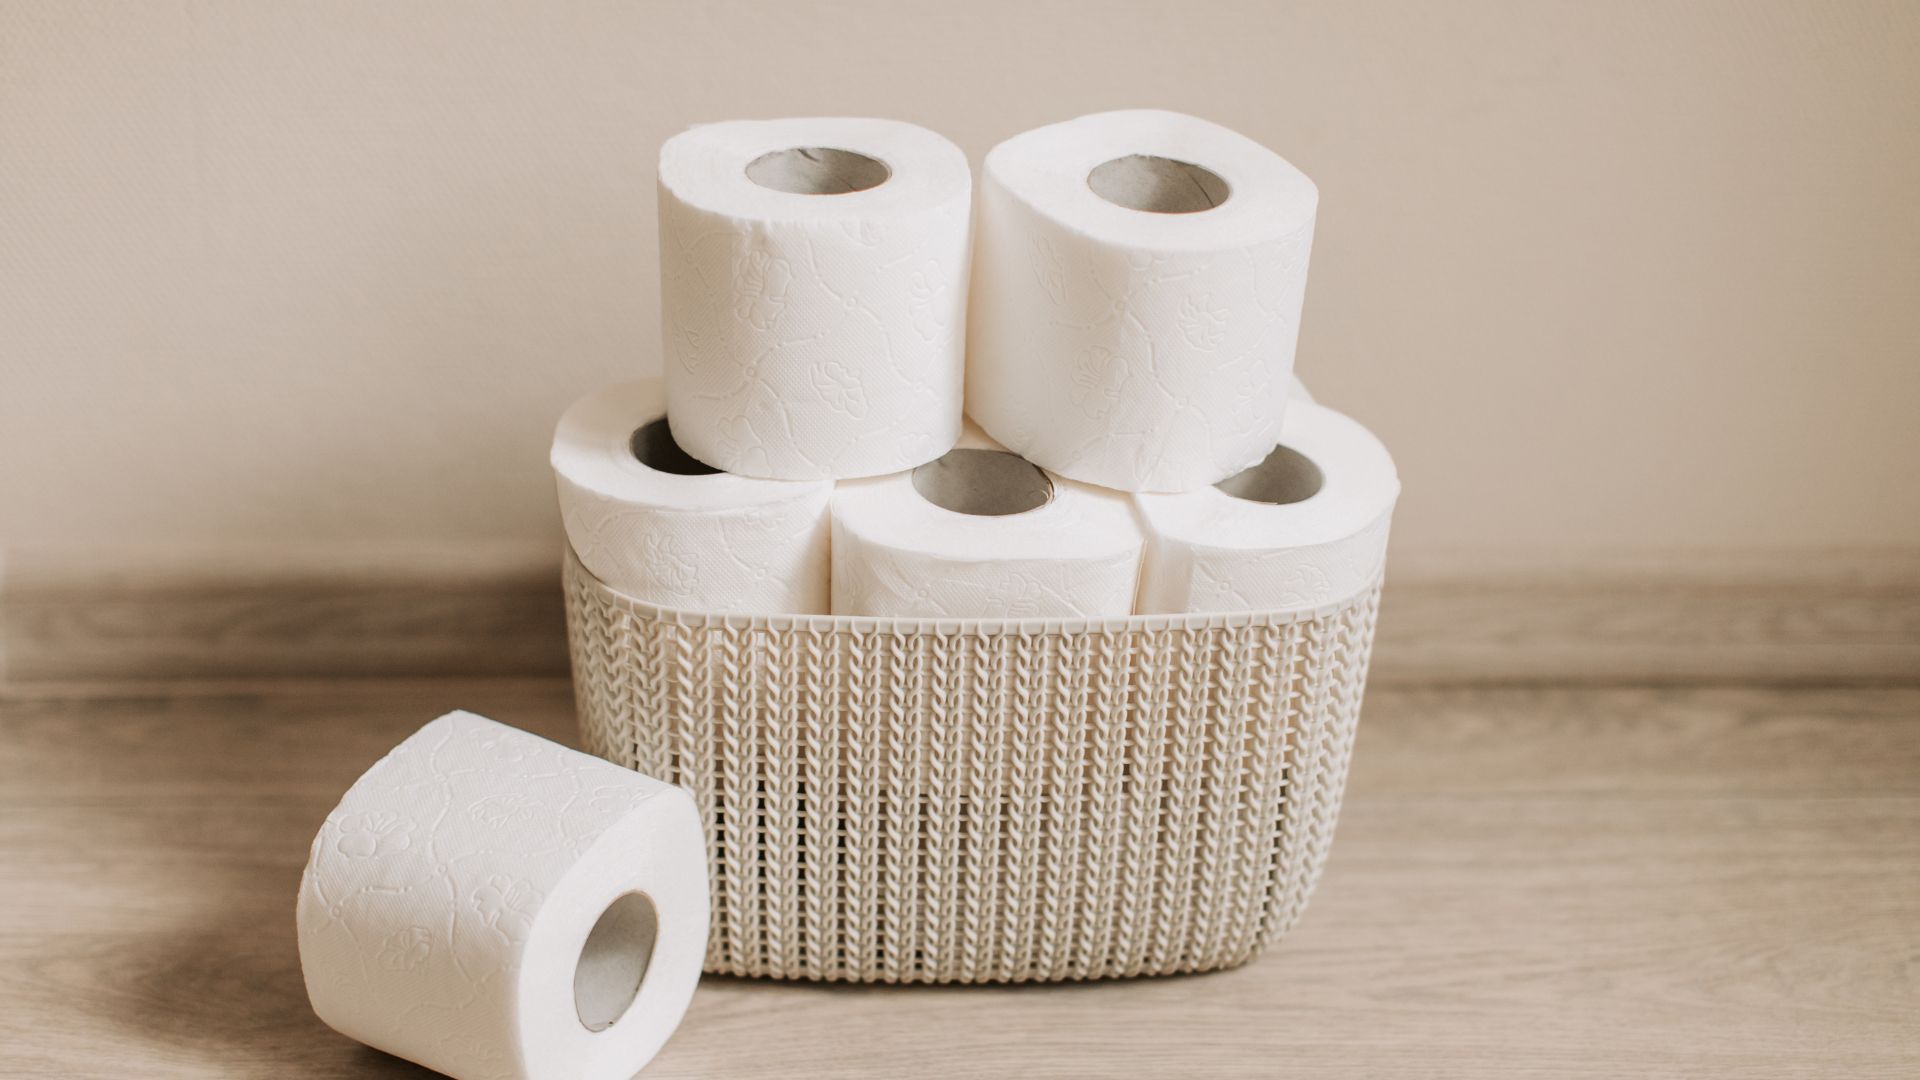 Decrease in Toilet Paper Consumption Advised by Plumbers